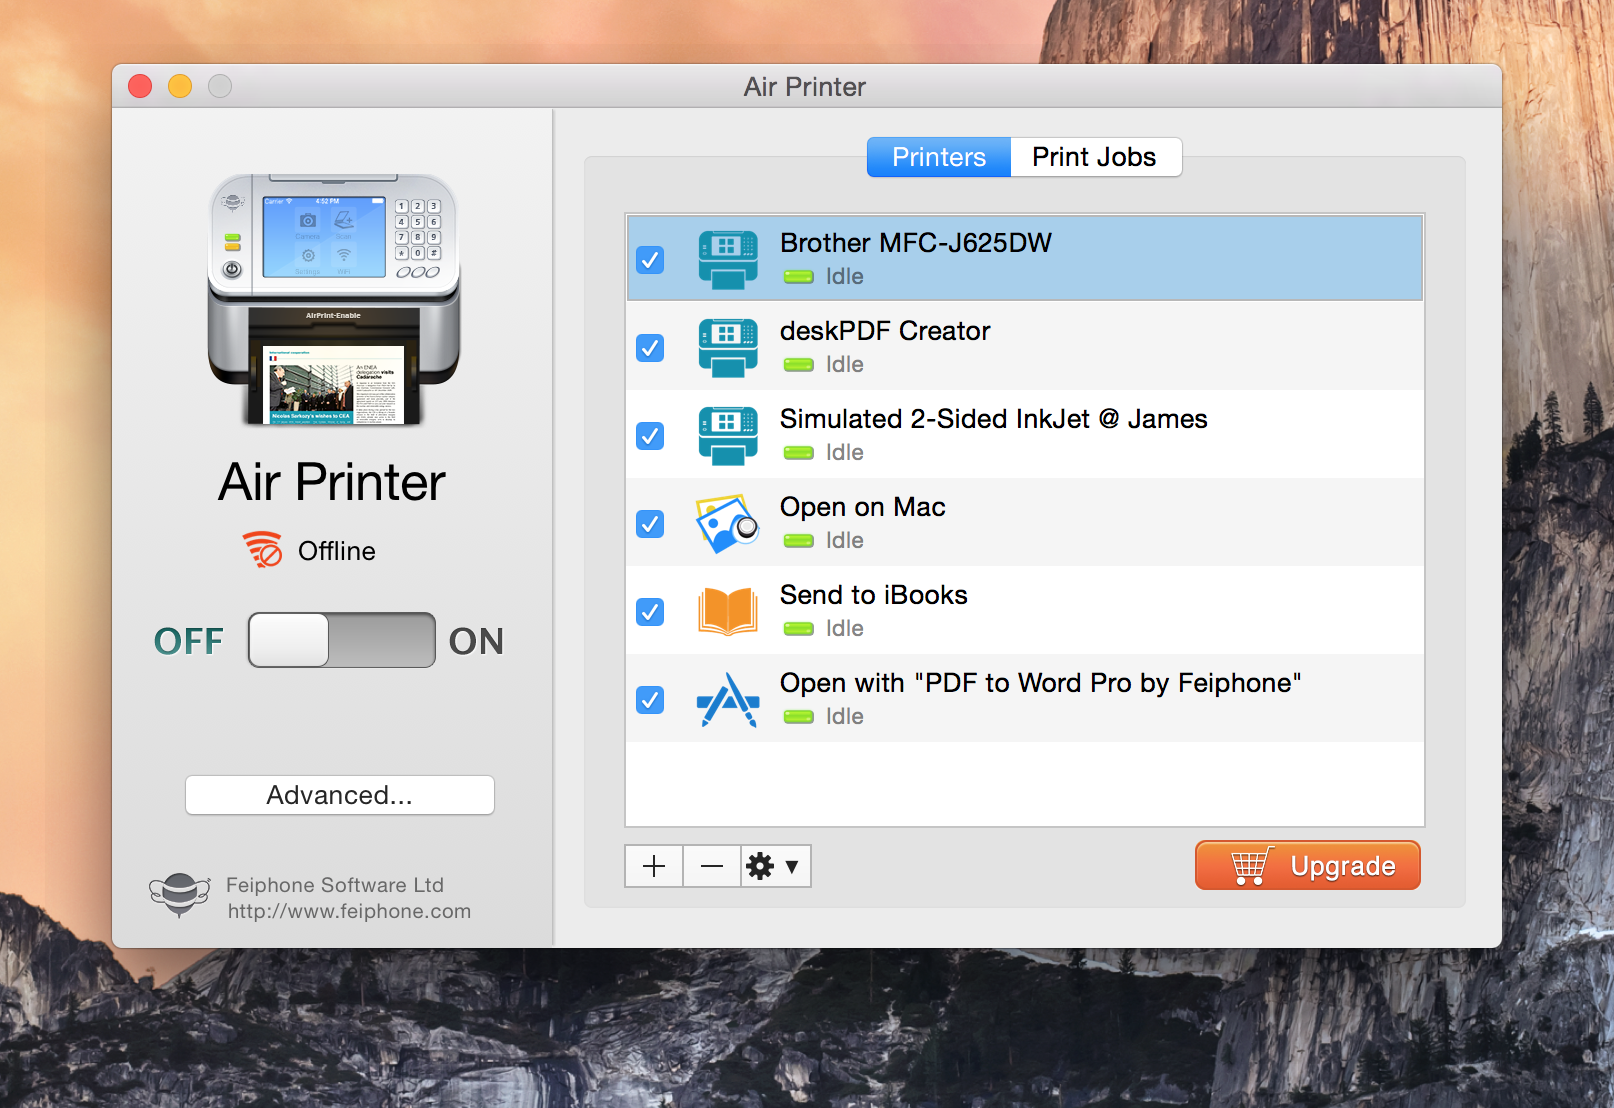 Air Printer - Wireless Print from iPhone, iPad to Any Printer